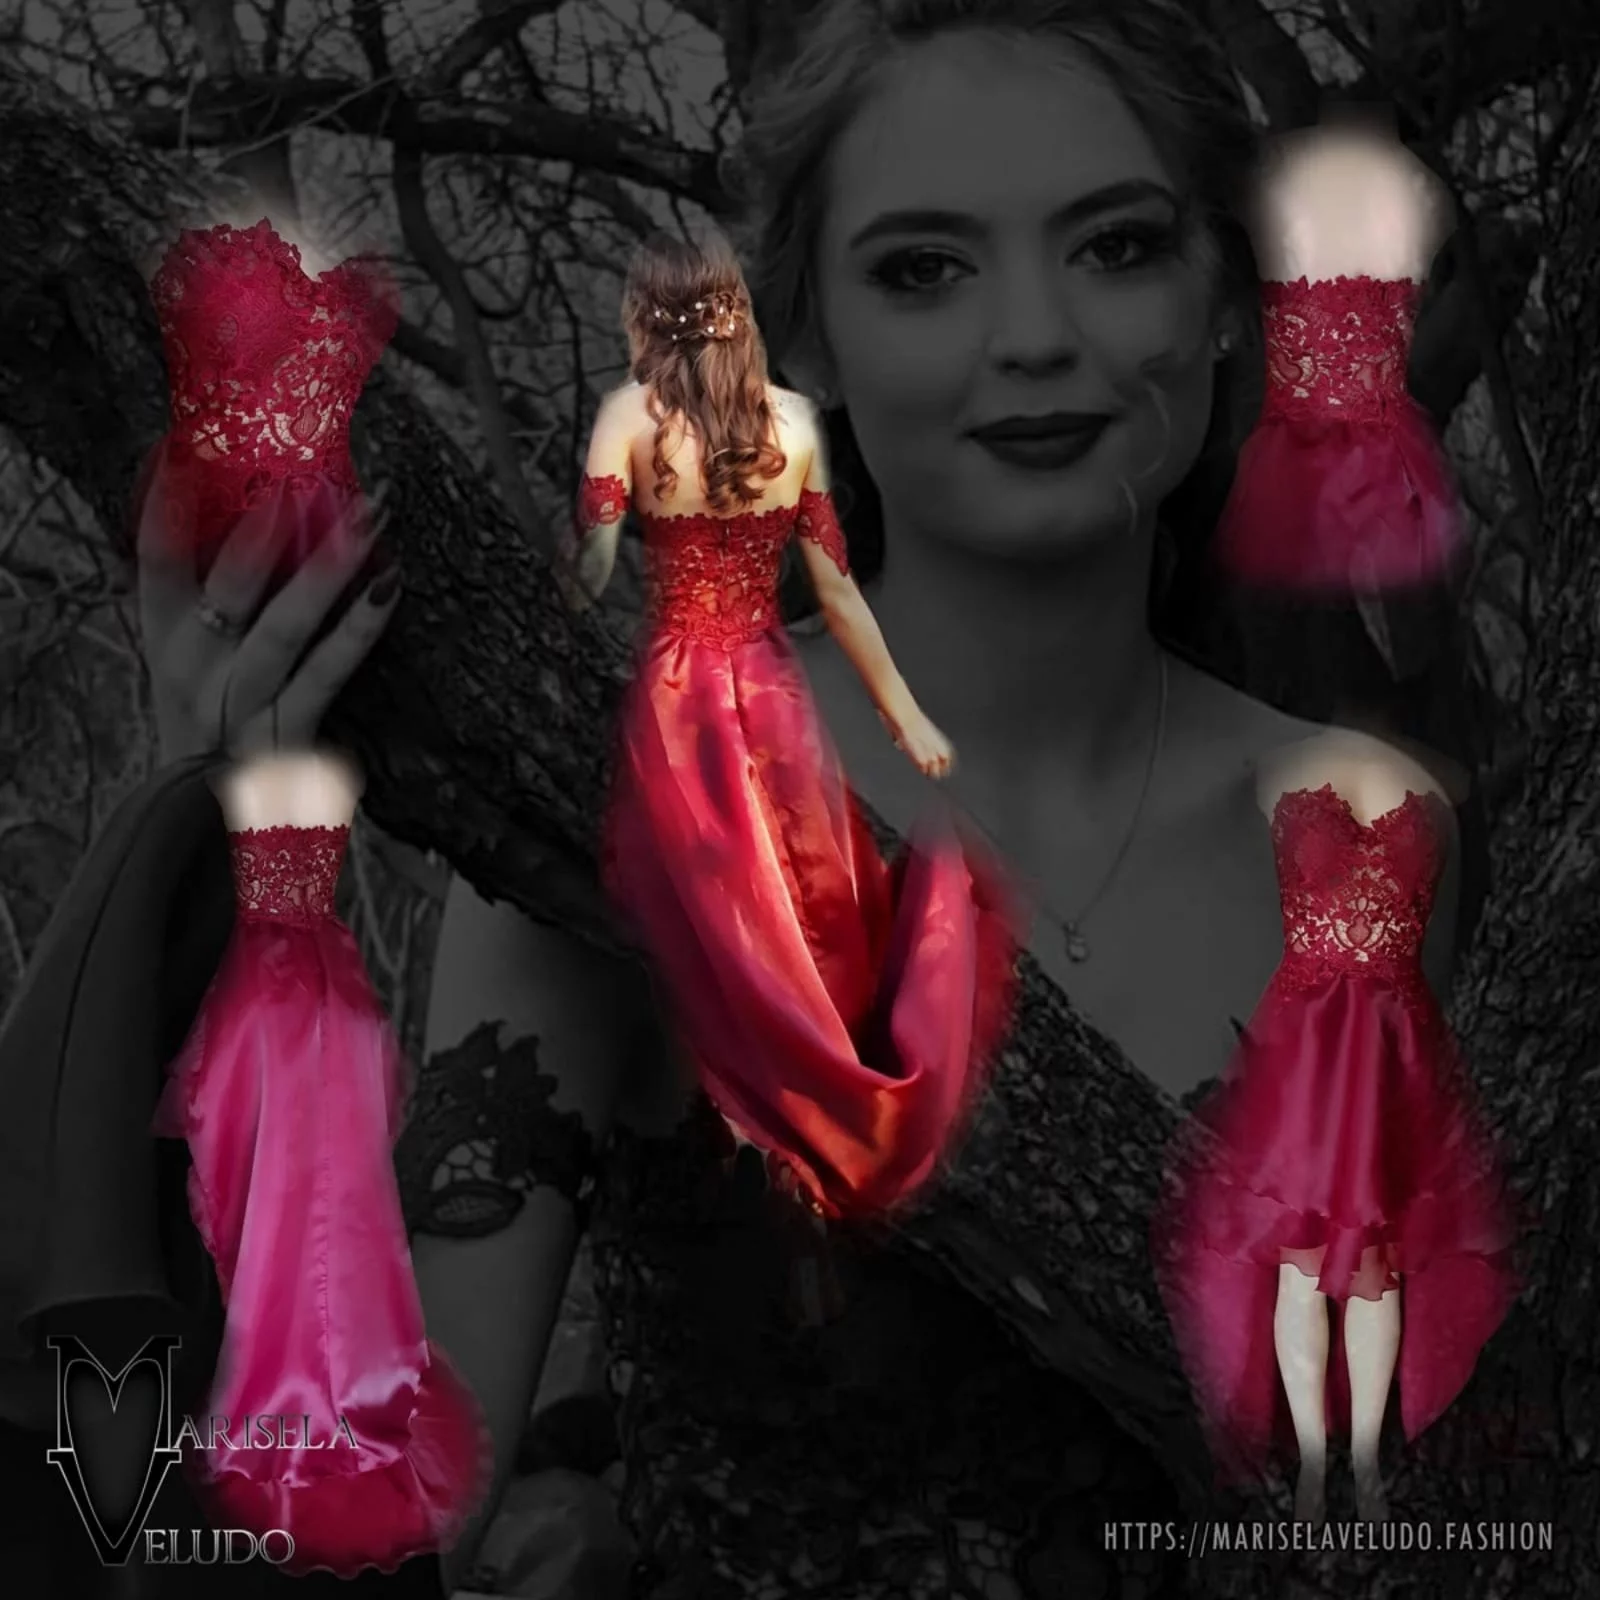 Dark red high low evening dress 11 the perfect dark red evening dress for your prom night if you want to look elegant yet adorable. With a lace bodice and a double layer hi - lo flowy bottom for a slight dramatic effect.